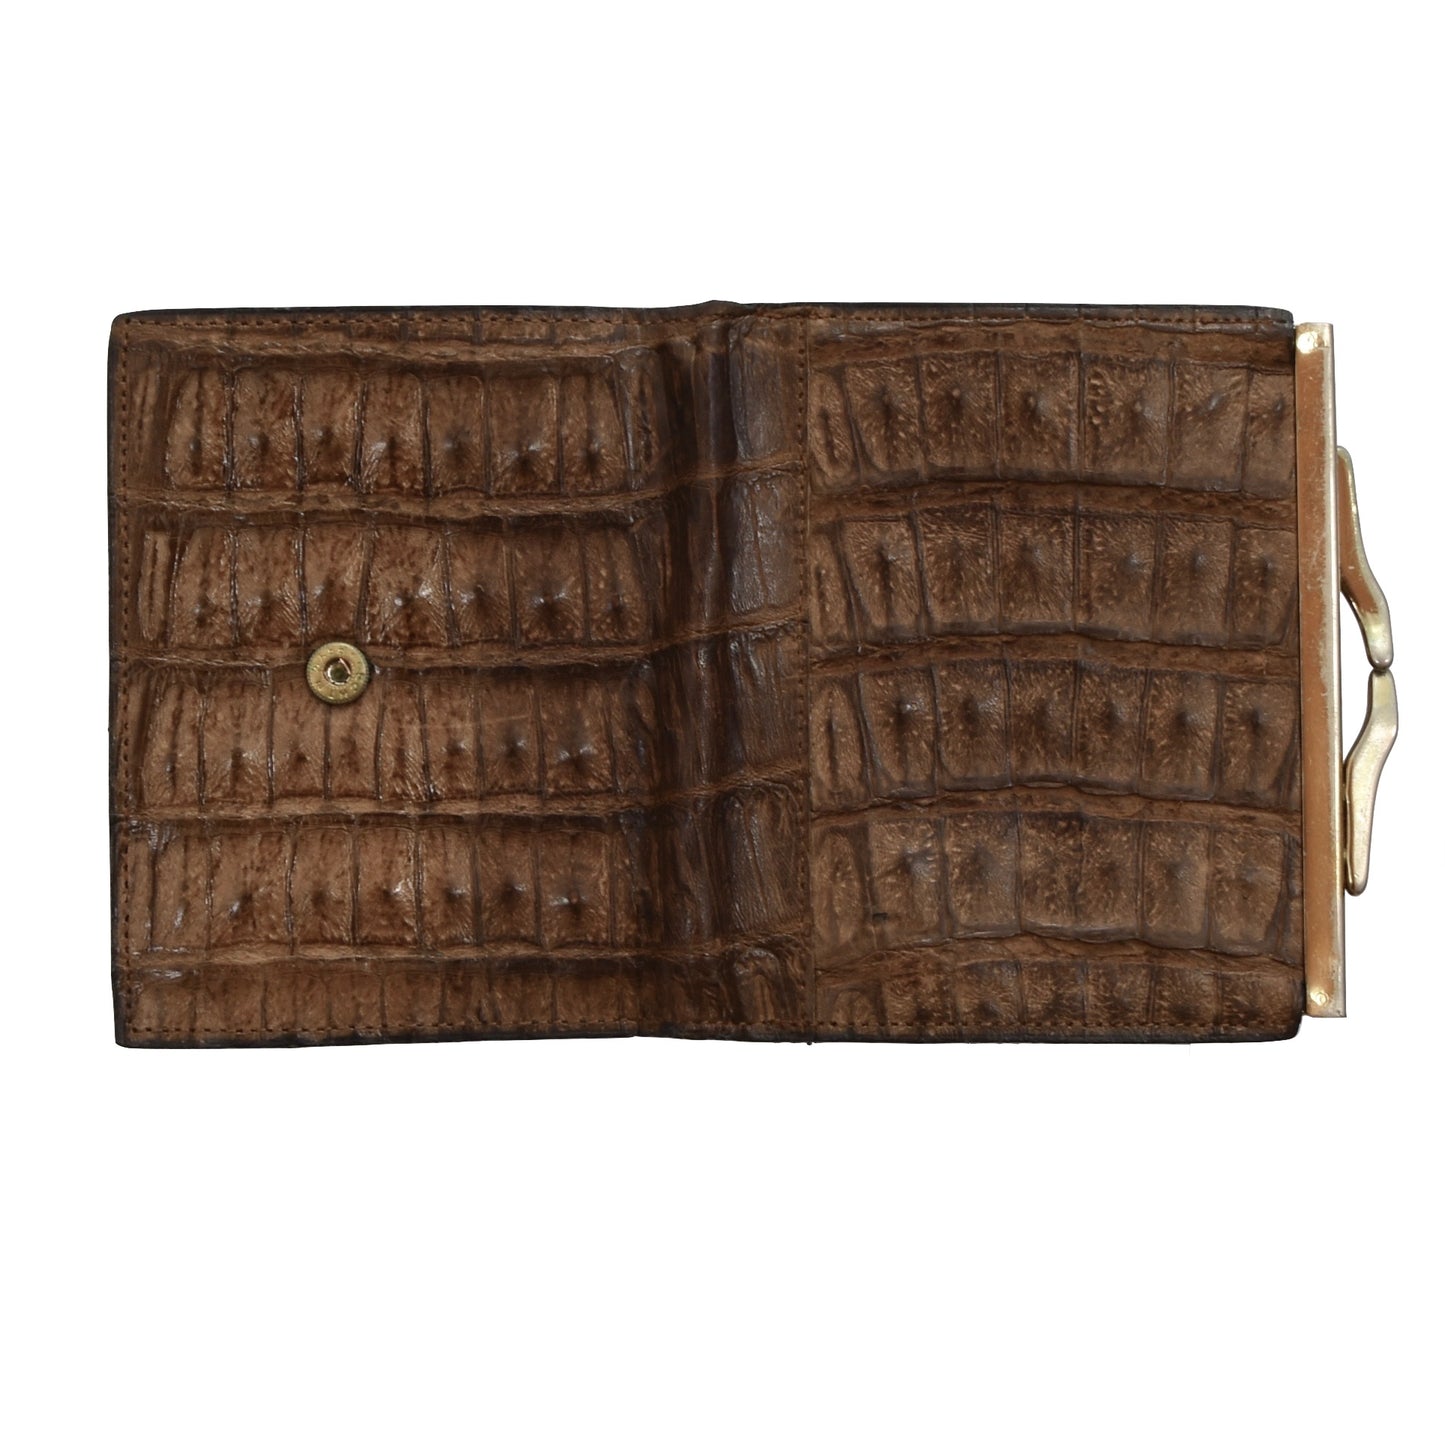 Crocodile Leather Wallet/Coin Purse - Brown